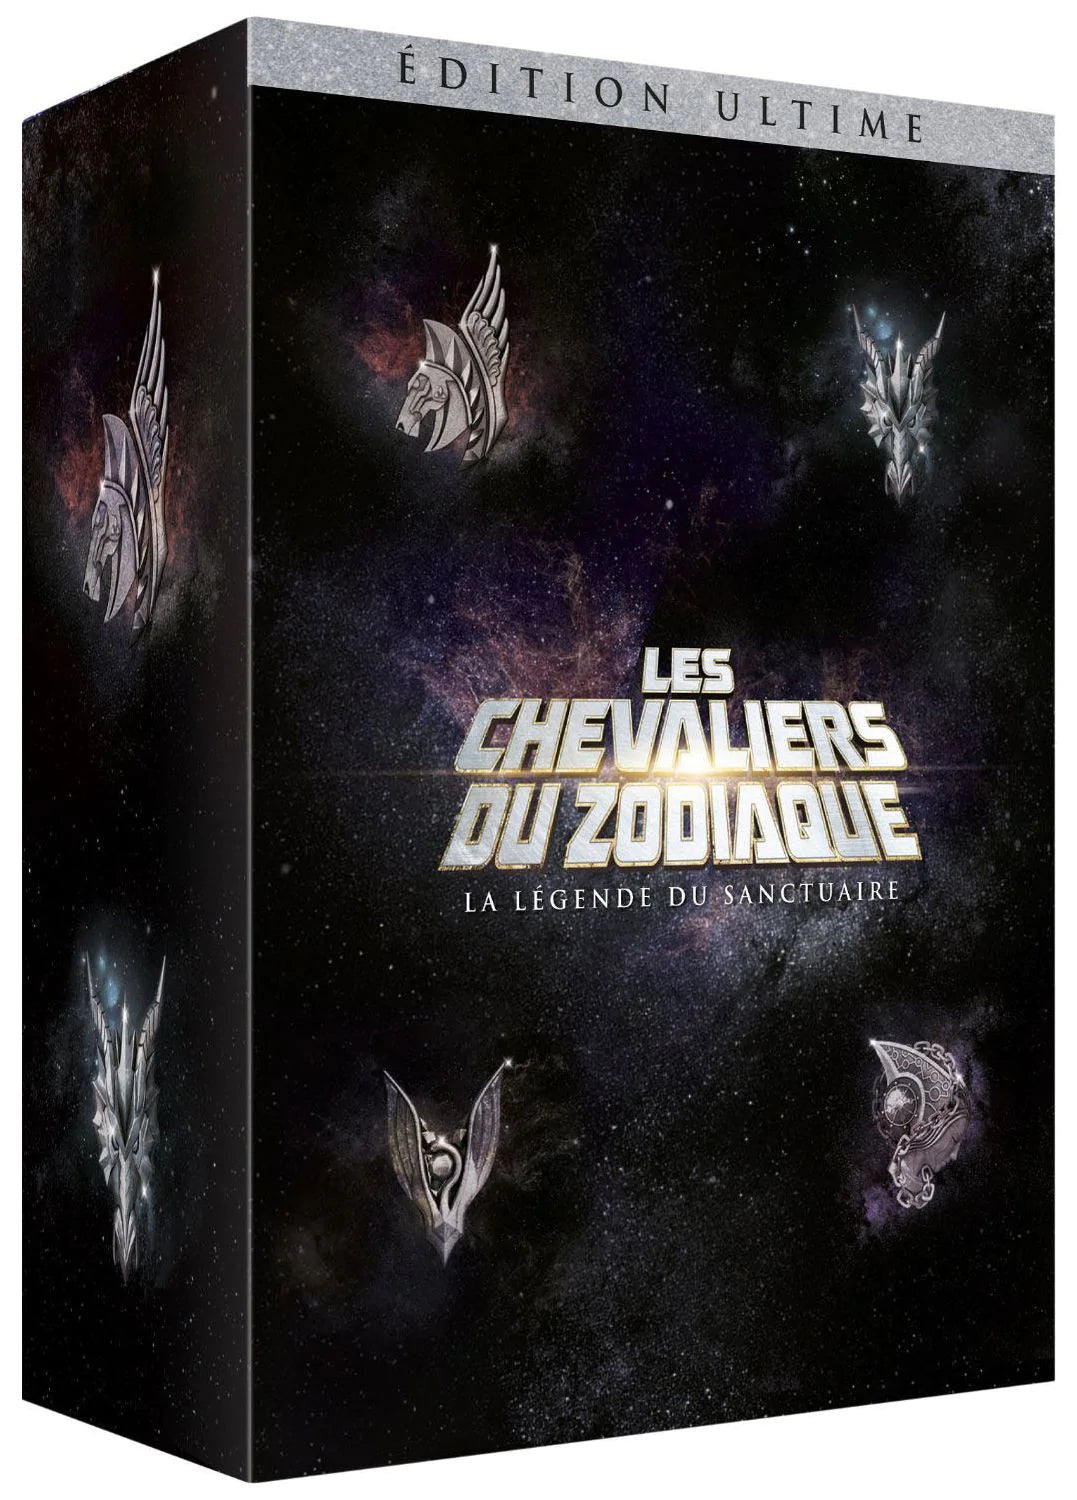 Chevaliers du Zodiaque Edition Ultime + Figurine - Combo DVD + Bluray